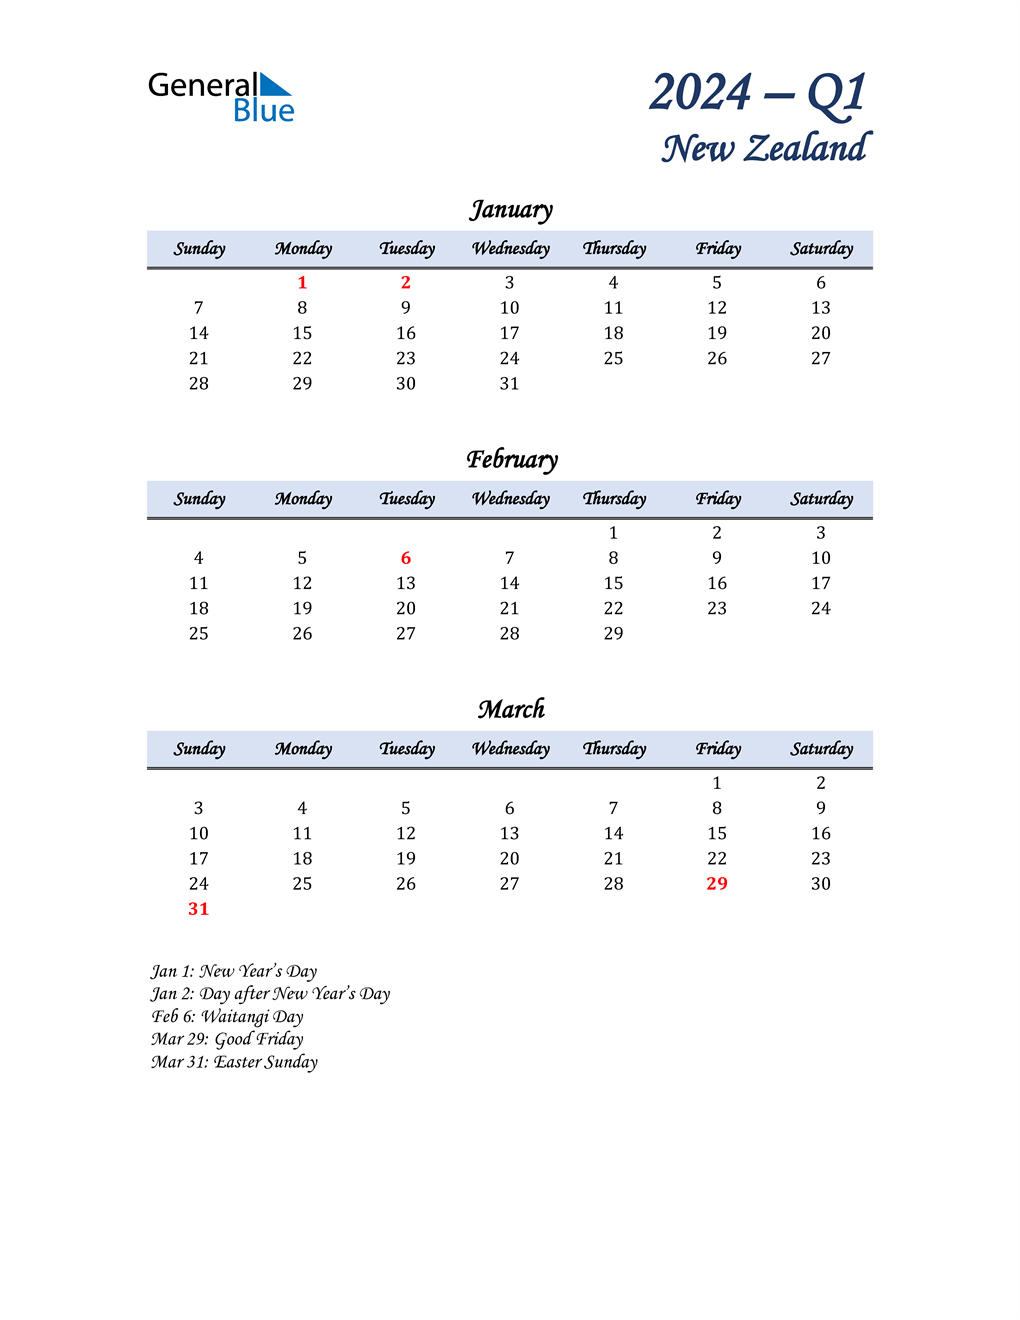  January, February, and March Calendar for New Zealand